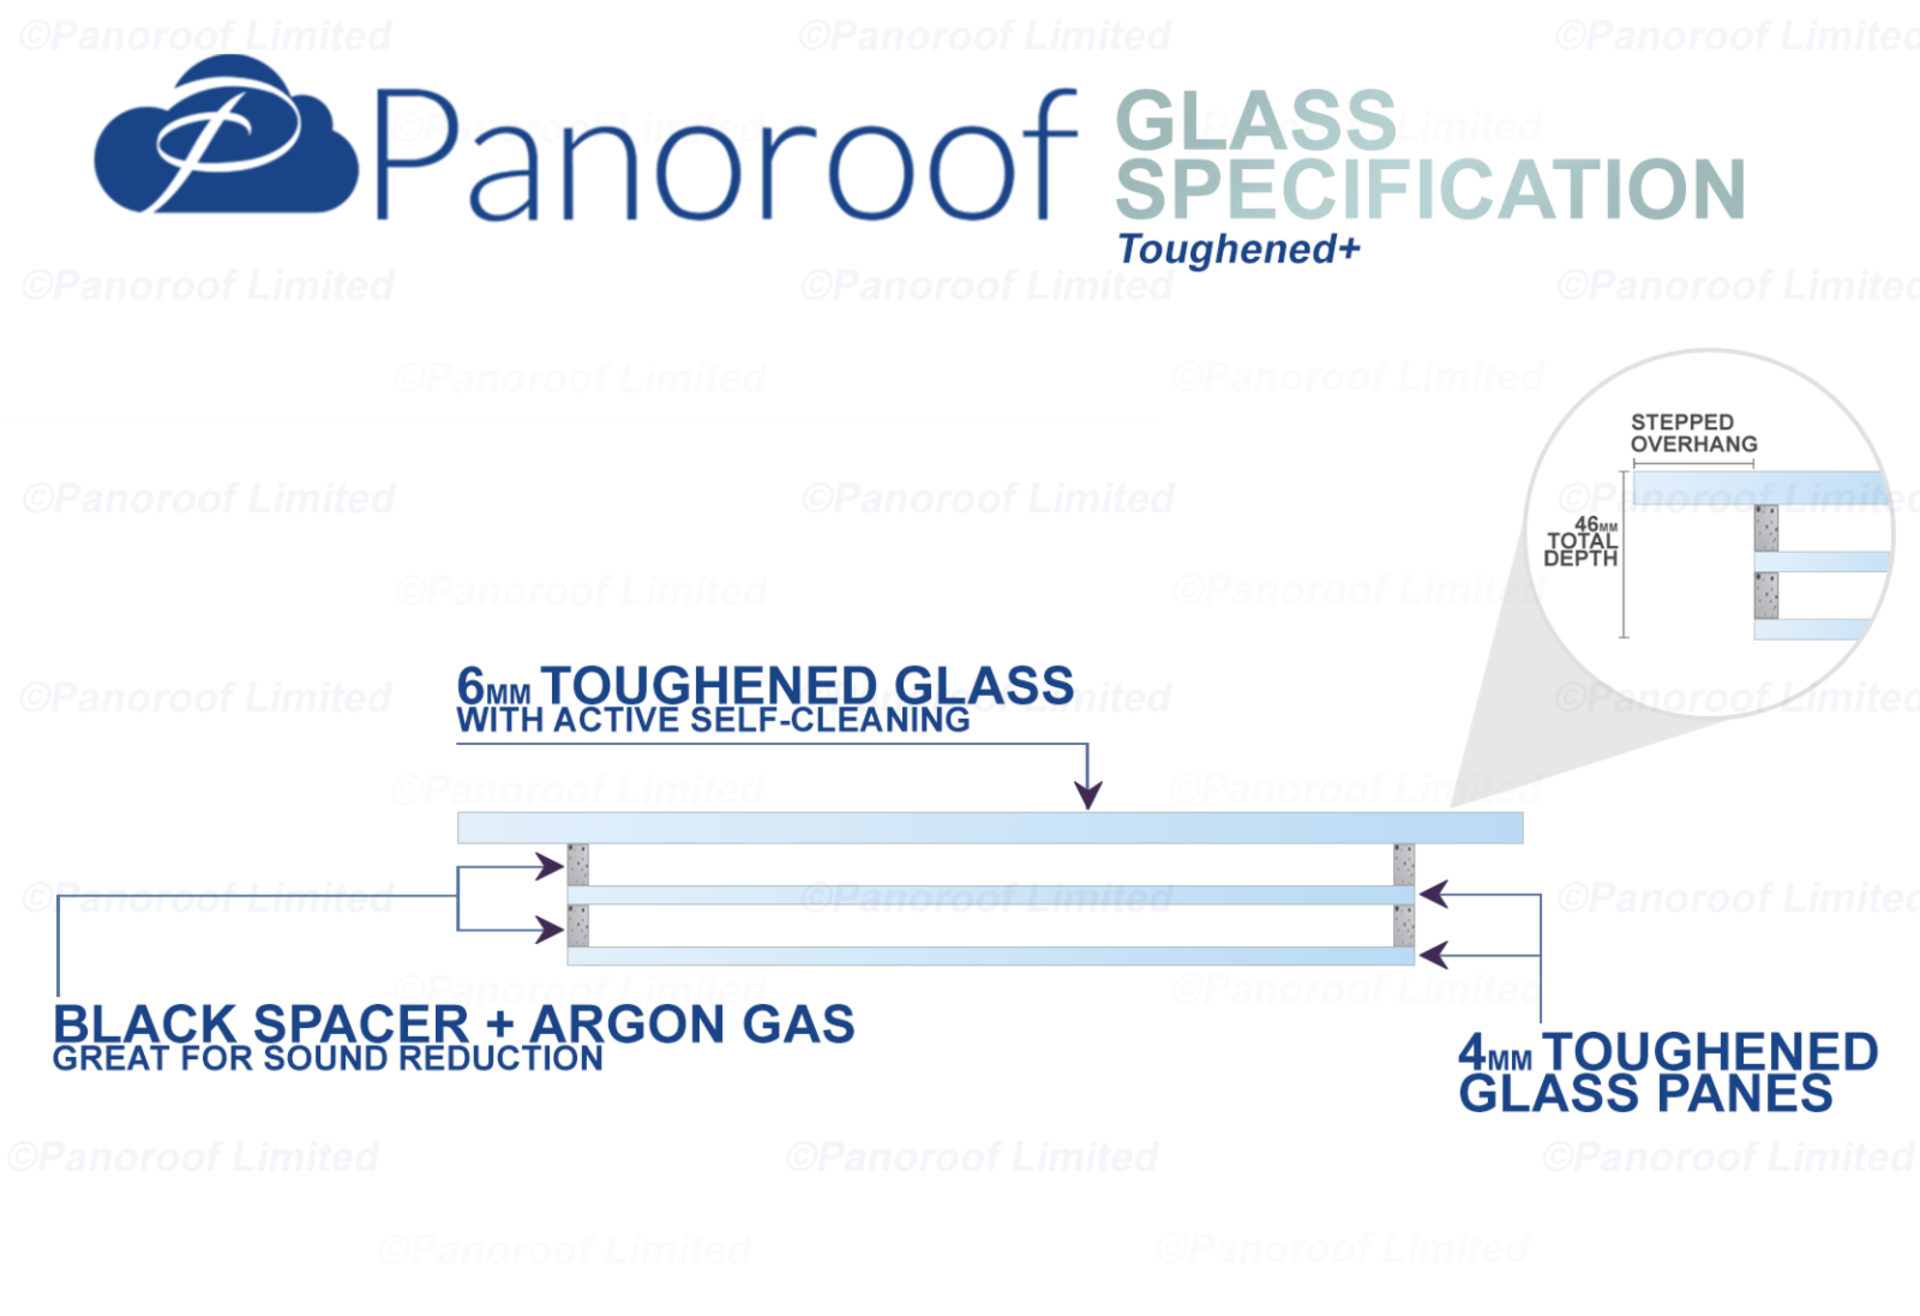 """Panoroof Triple Glazed Self Cleaning 500x1200mm (inside Size Visable glass area) Seamless Glass - Image 5 of 6